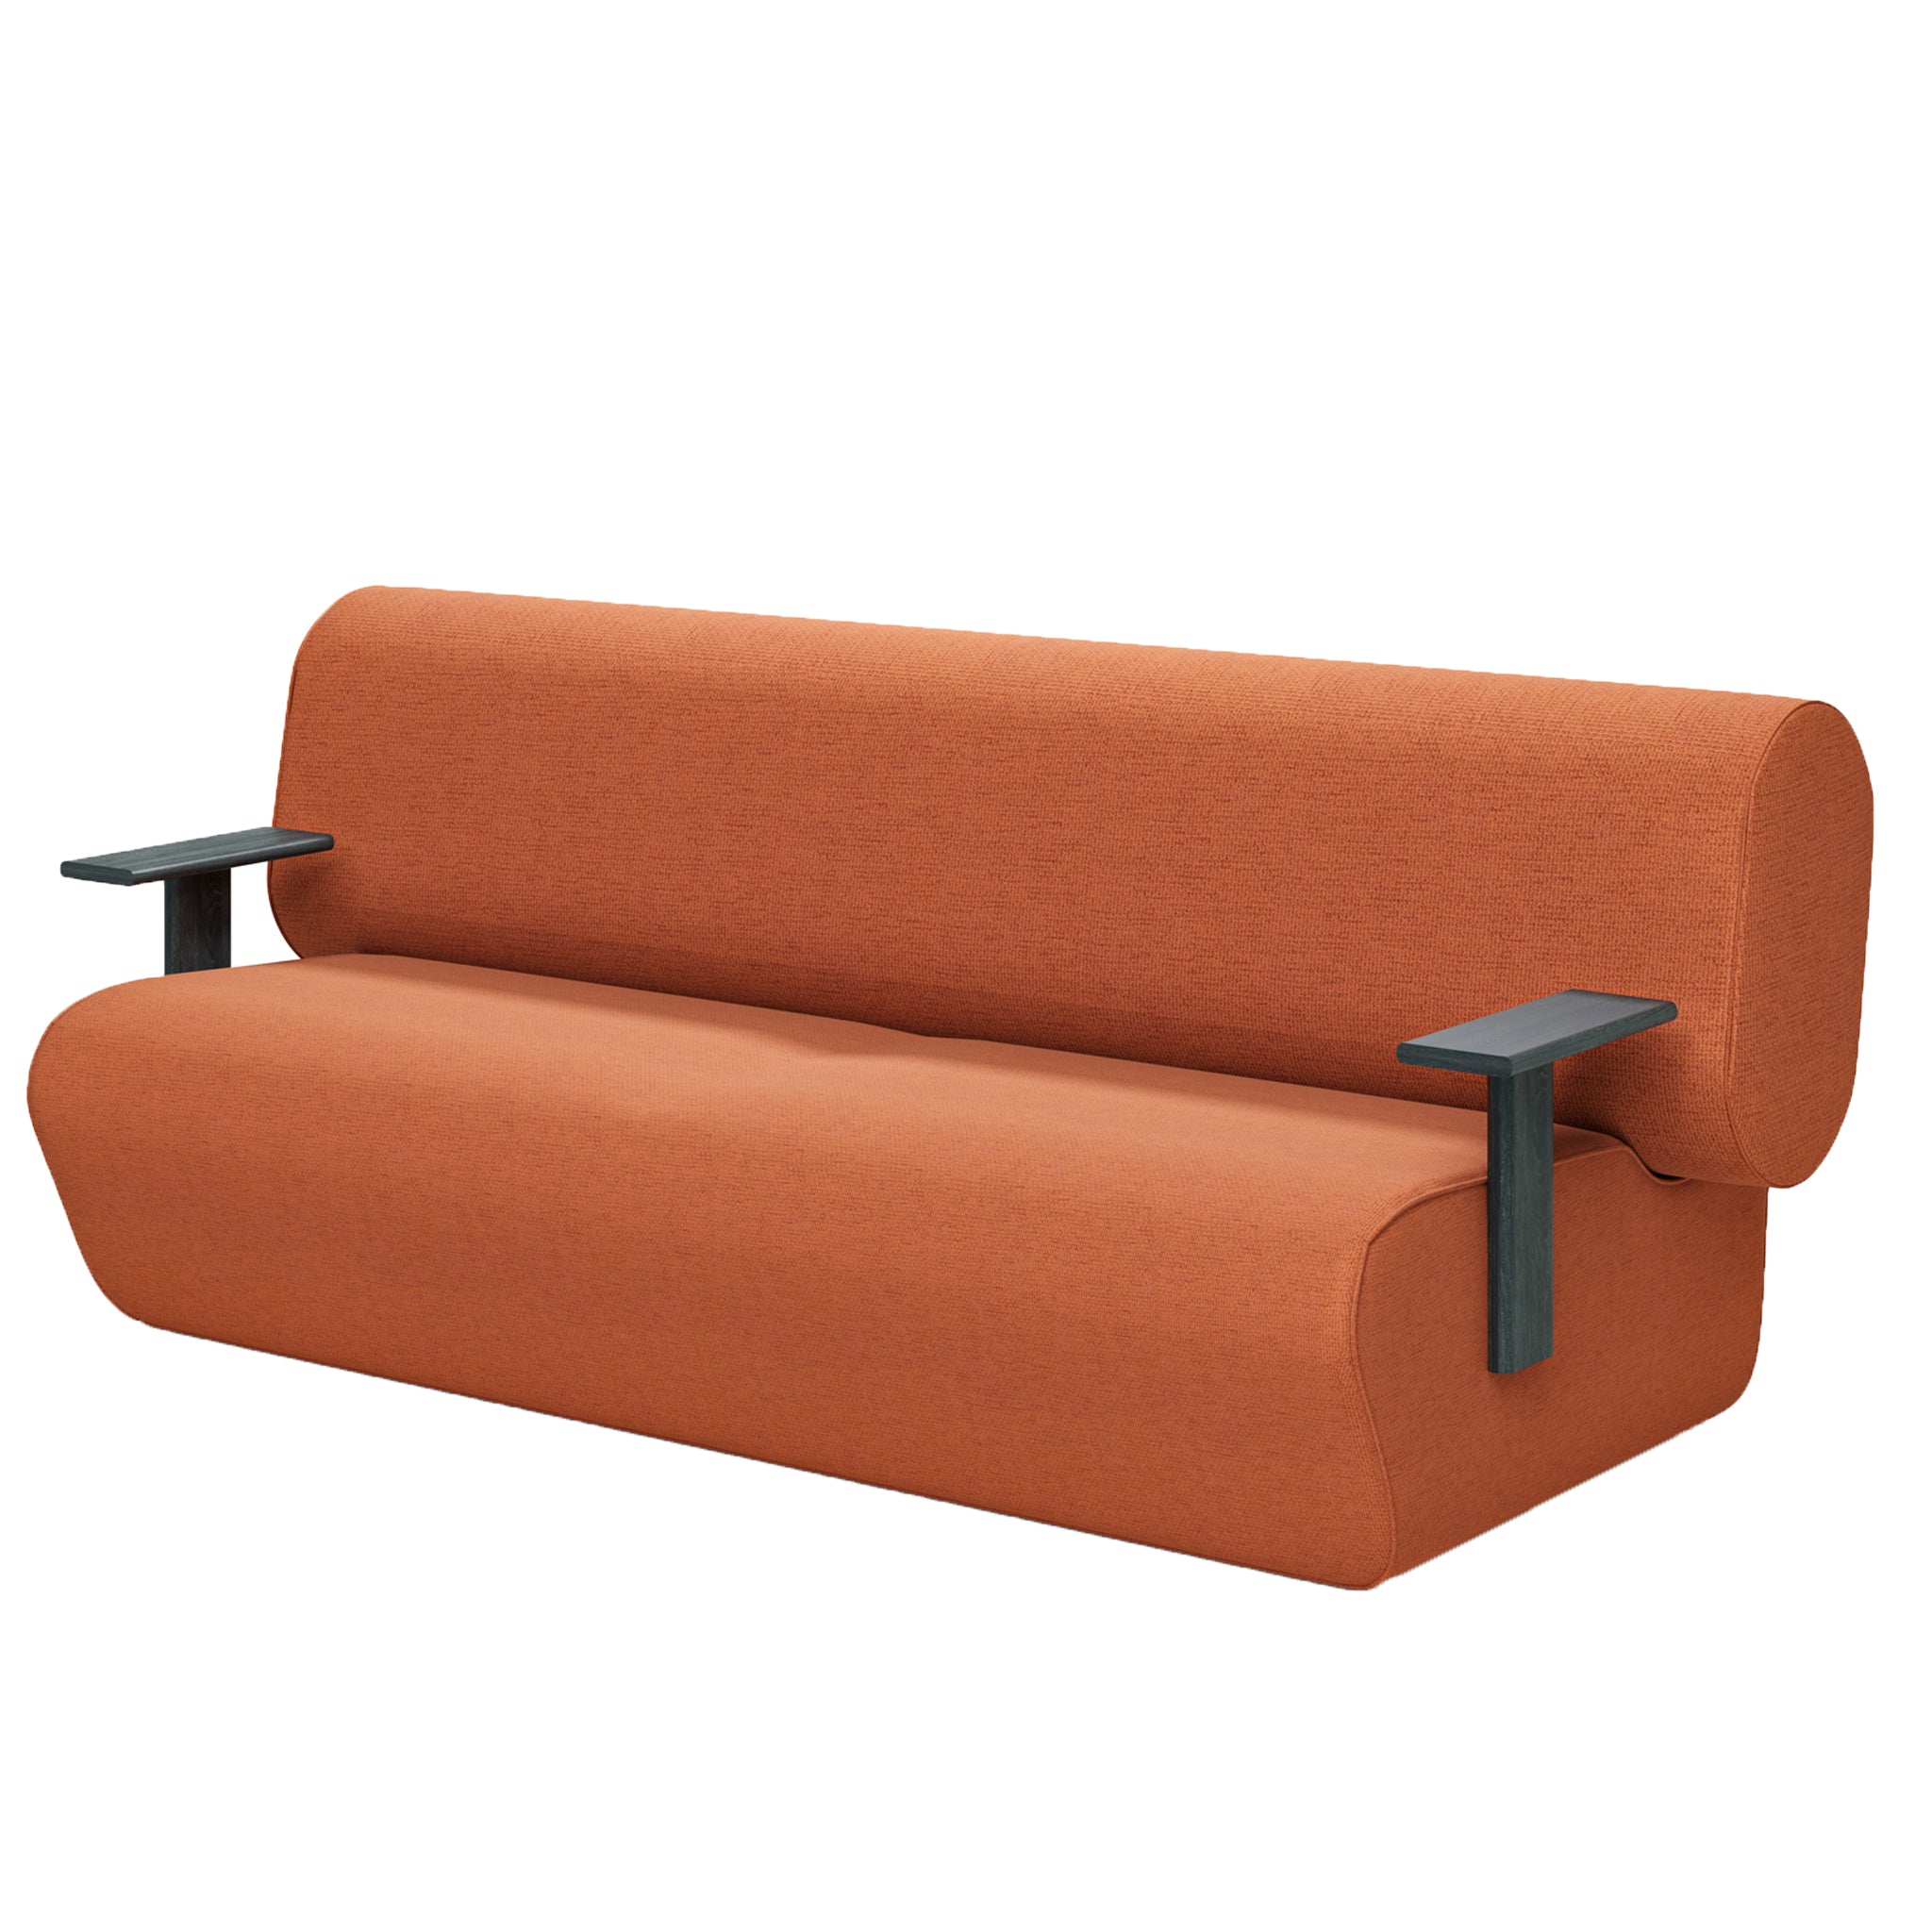 Form - 3 Seater